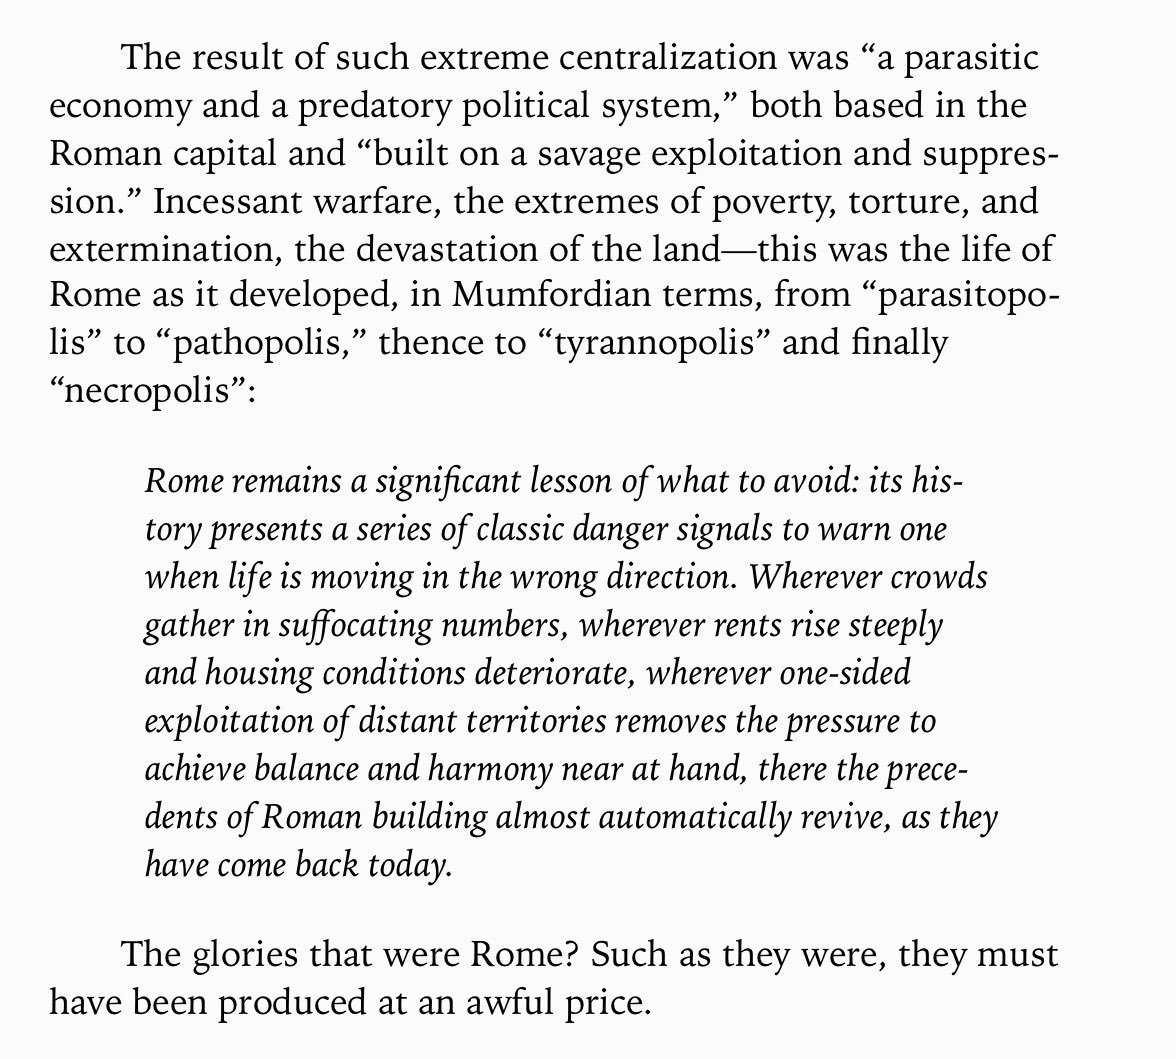 Kirkpatrick Sale goes full Spengler here, quoting Lewis Mumford on Rome and the dangers of over-centralization: the devestation of the land, the erection of useless monuments, the creation of unsolvable social problems.